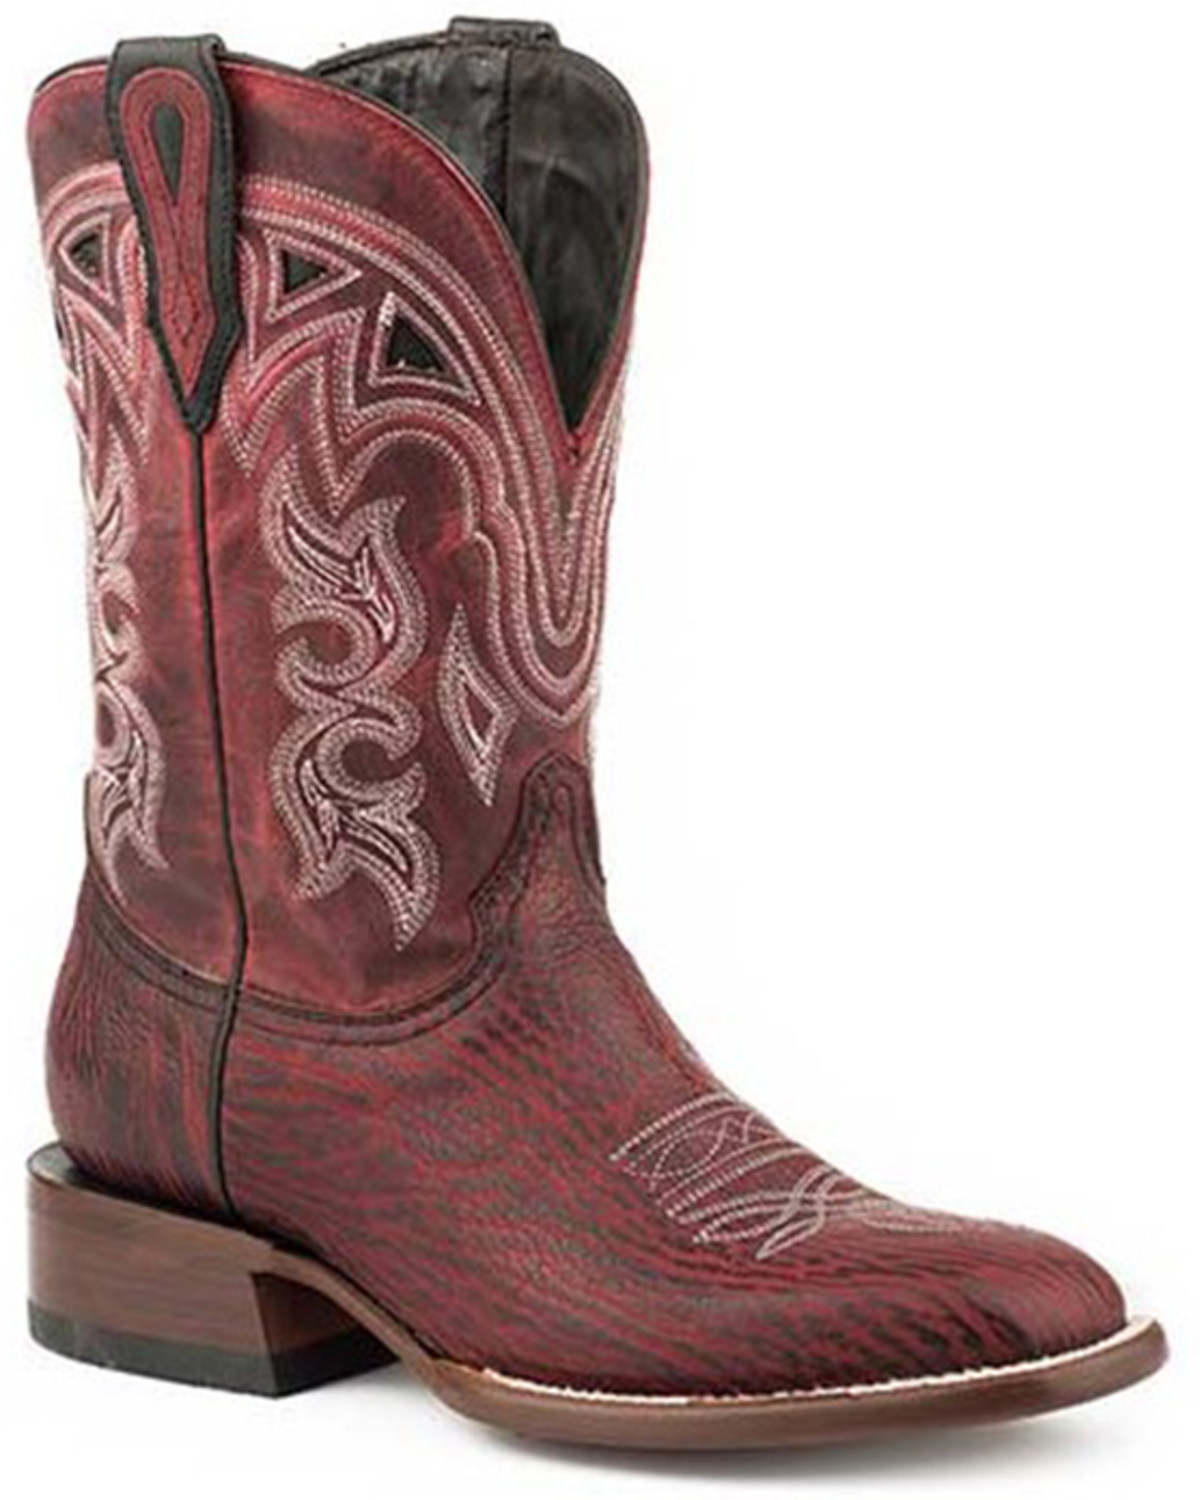 Stetson Women's Meadow Exotic Shark Boots - Square Toe